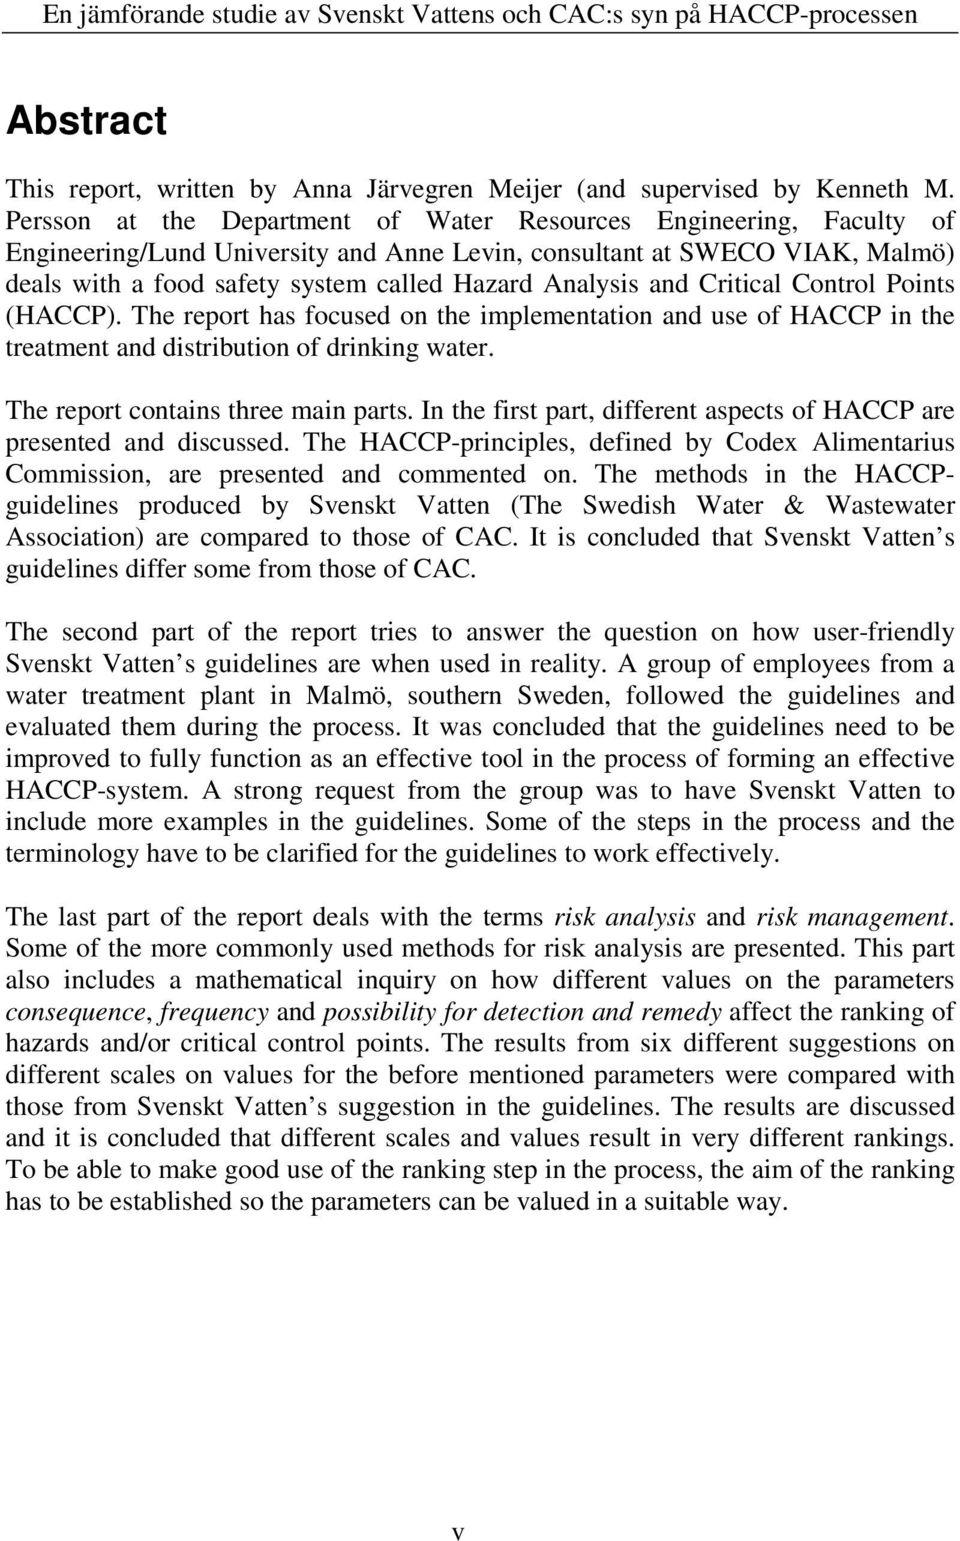 Analysis and Critical Control Points (HACCP). The report has focused on the implementation and use of HACCP in the treatment and distribution of drinking water. The report contains three main parts.